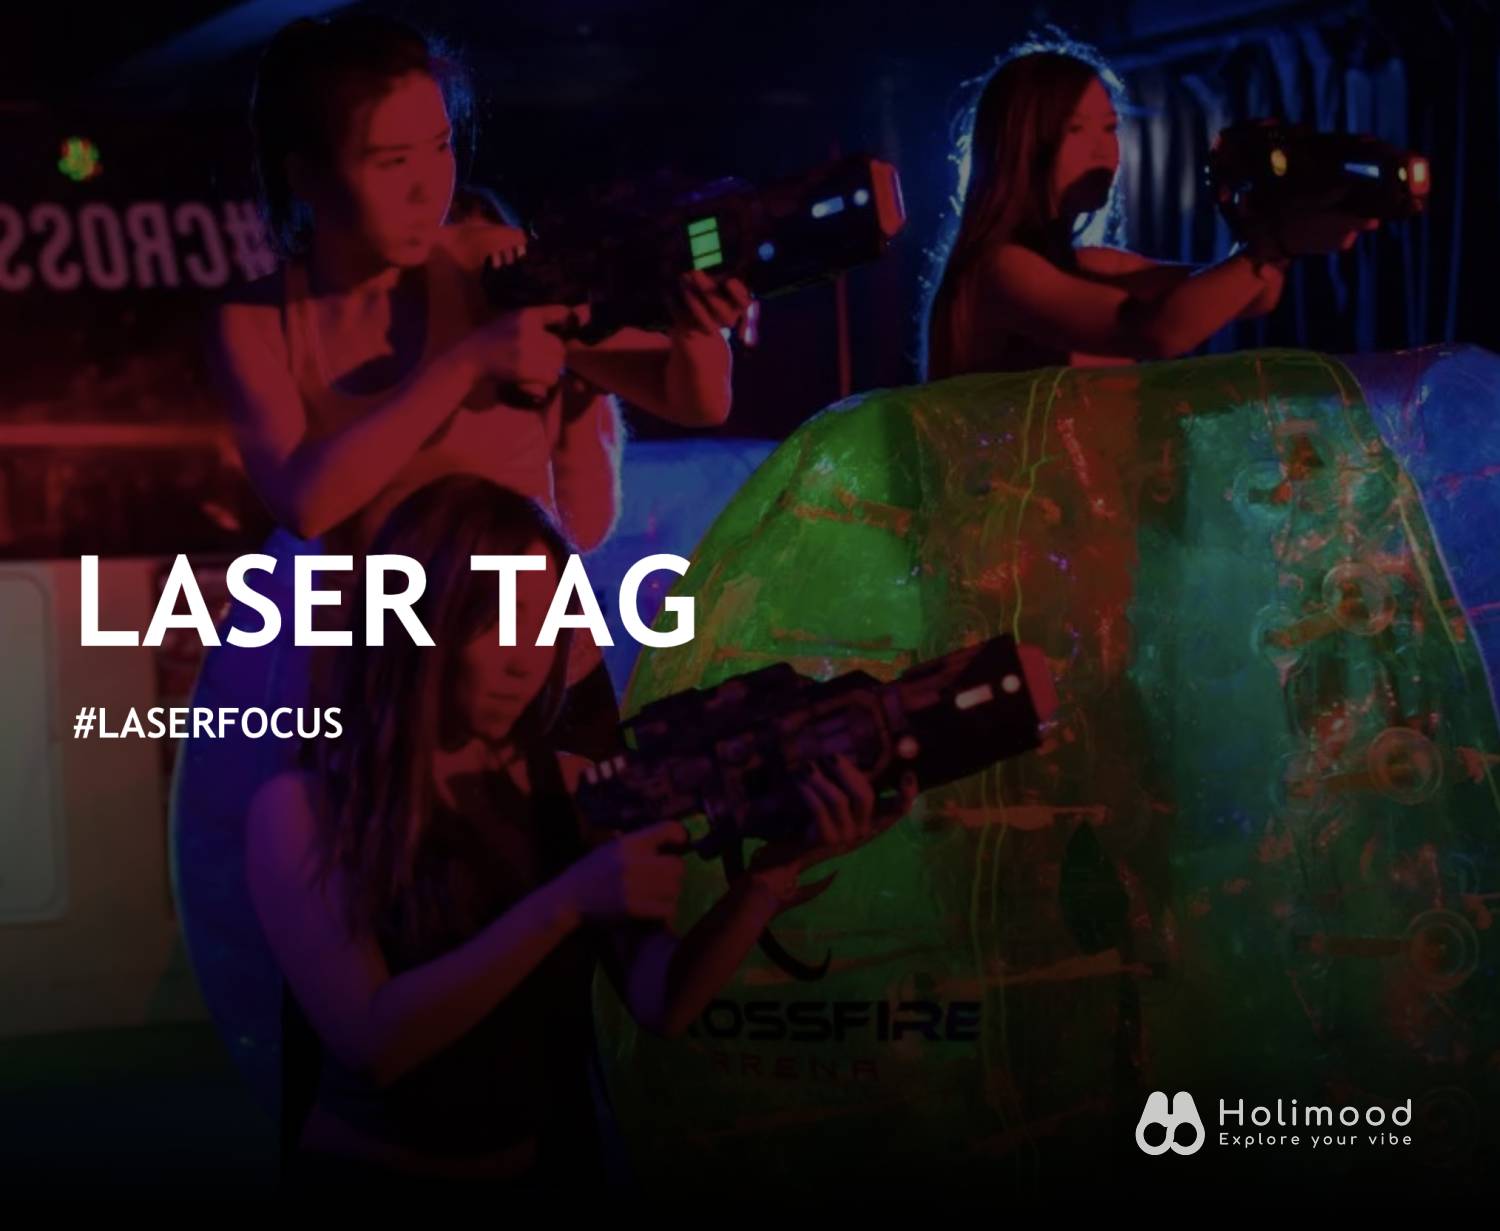 Crossfire Arena 【 Laser Tag 激光大戰】： Crossfire Arena  夜光室內槍戰 1